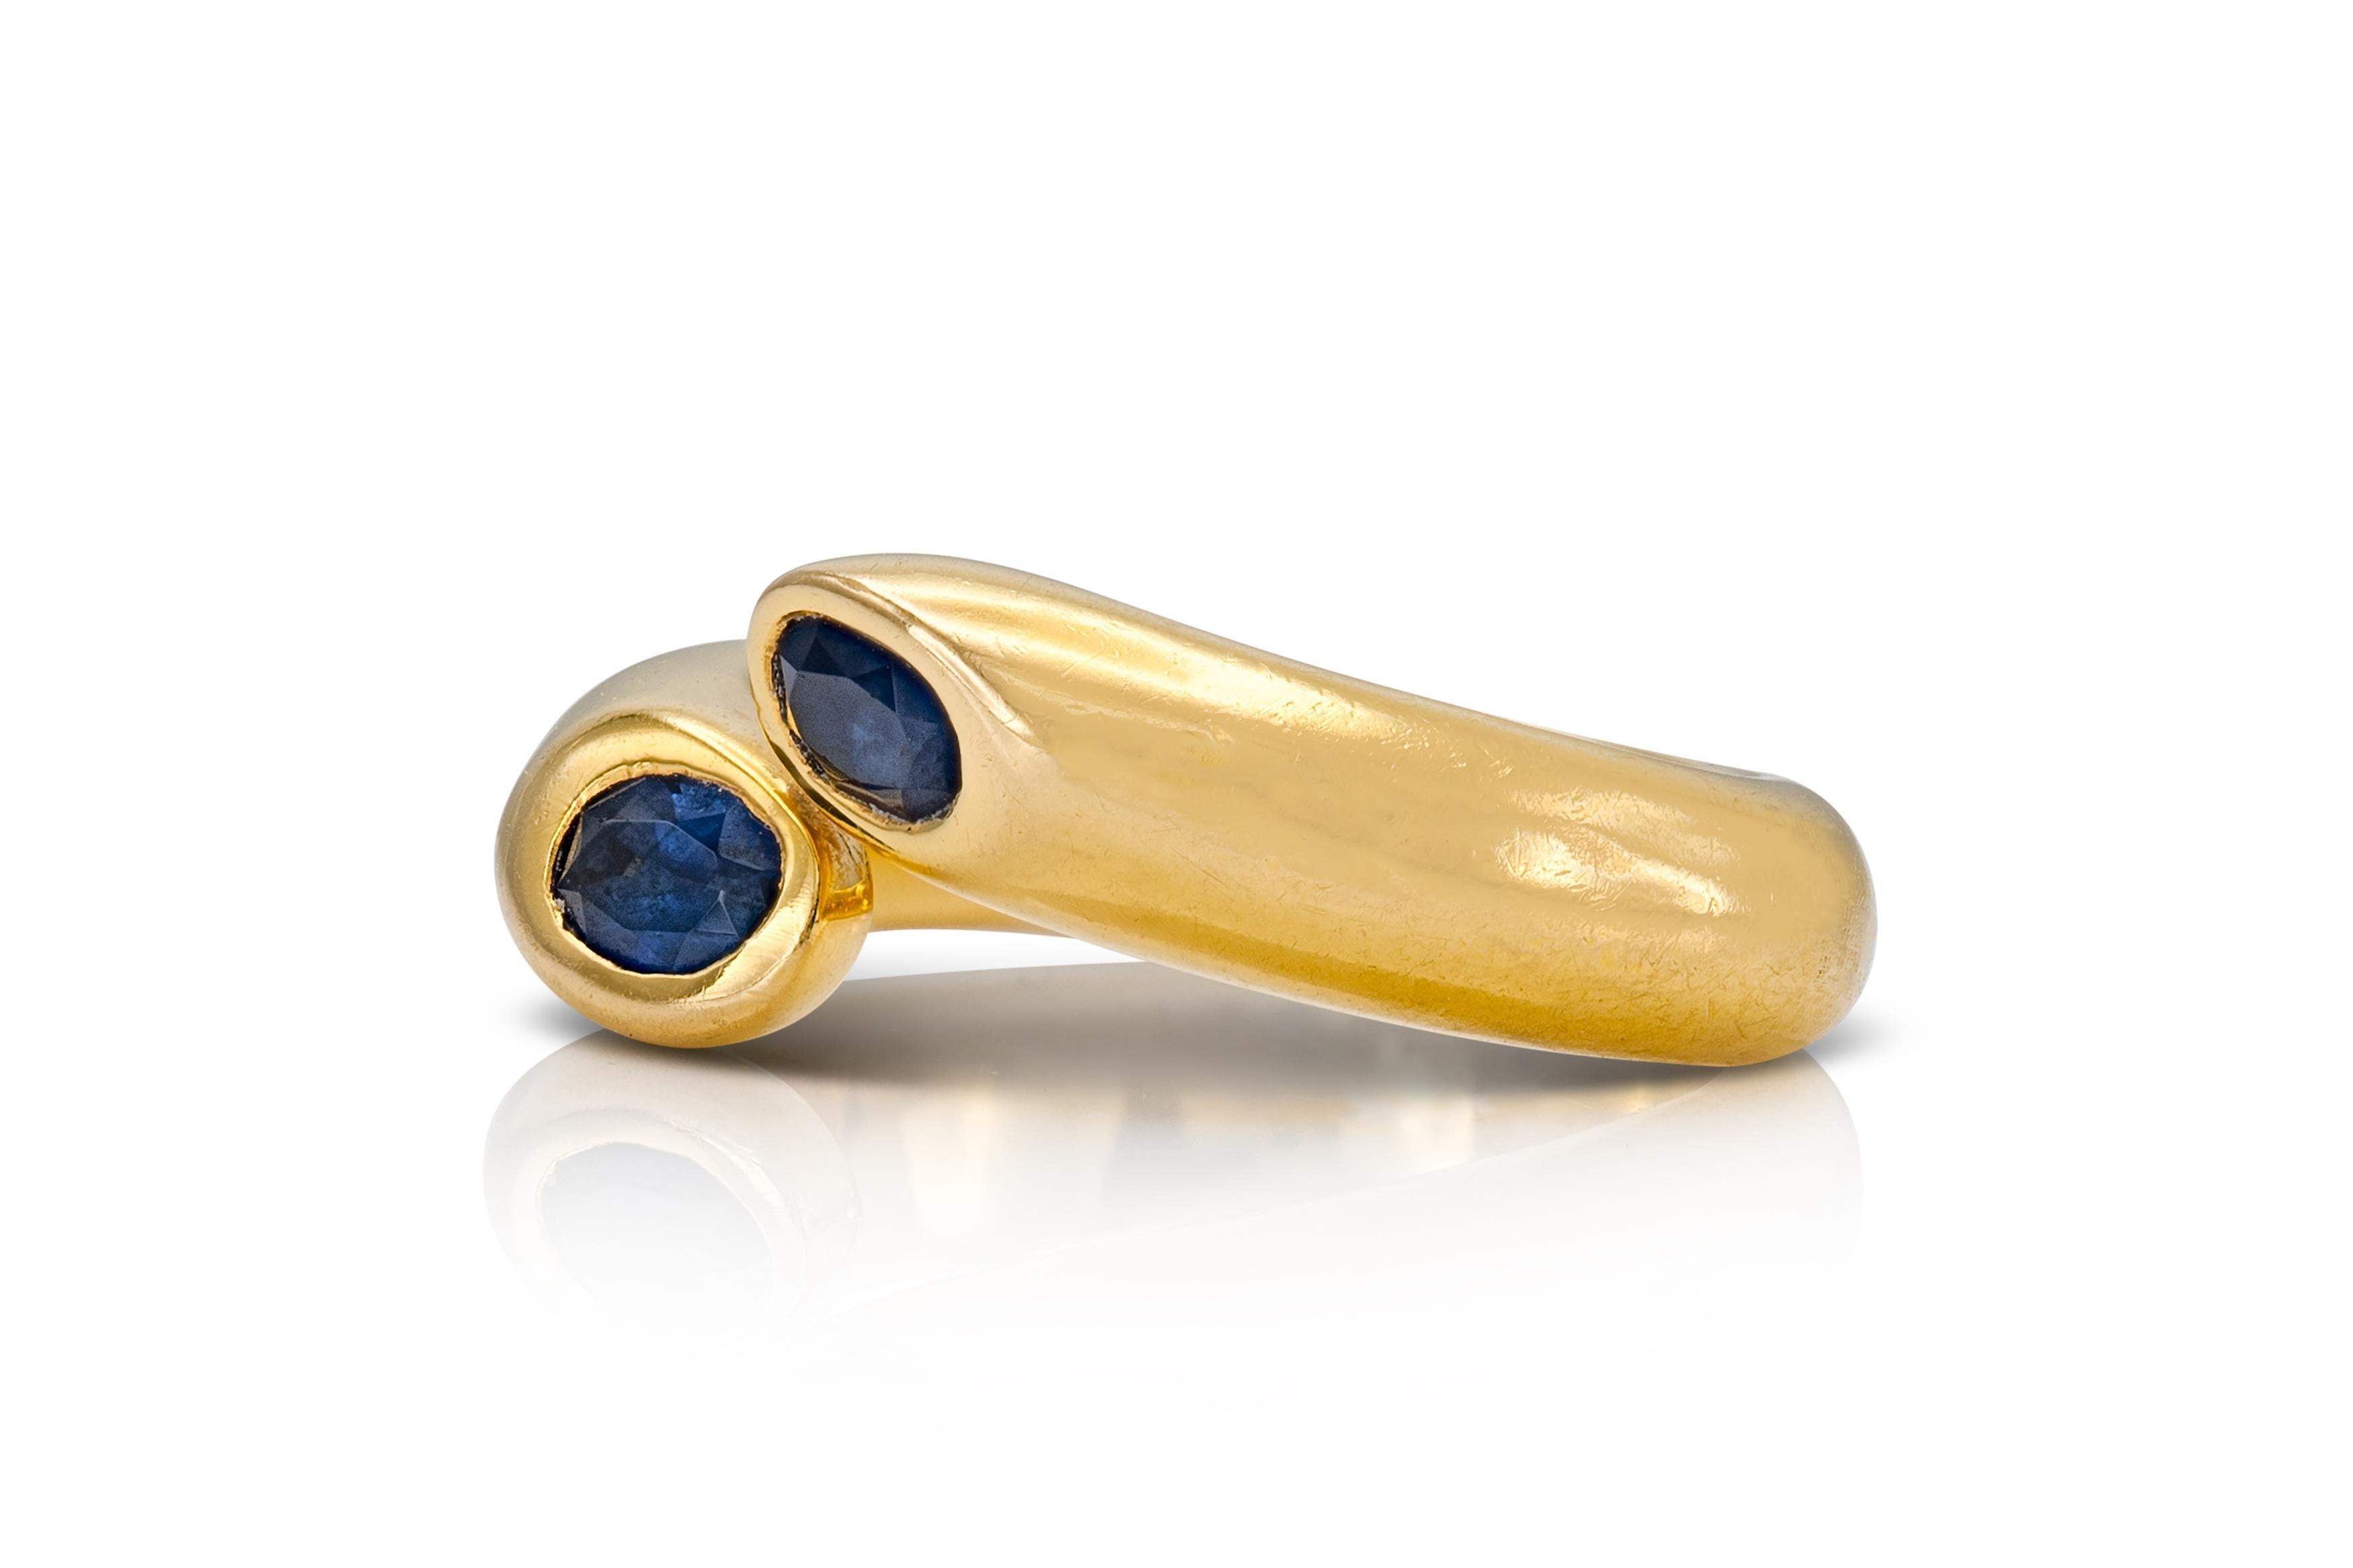 Finely crafted in 18k yellow gold with two Oval cut Sapphires.
Signed by Cartier
Circa 1995
Size 47 (US 4 1/4)